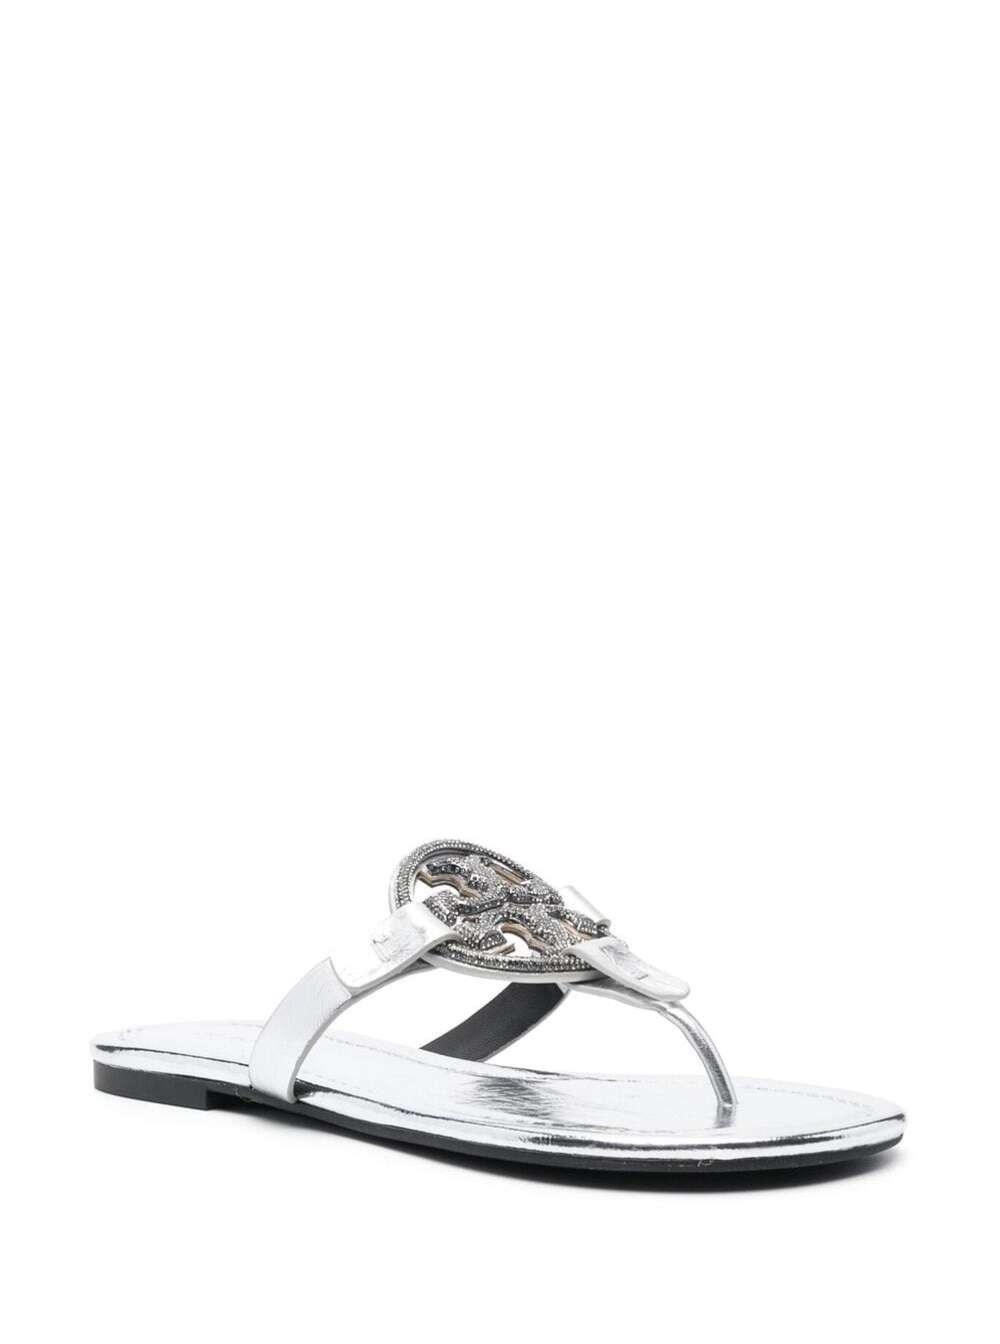 Tory Burch 'miller Pave' Sandals in White | Lyst